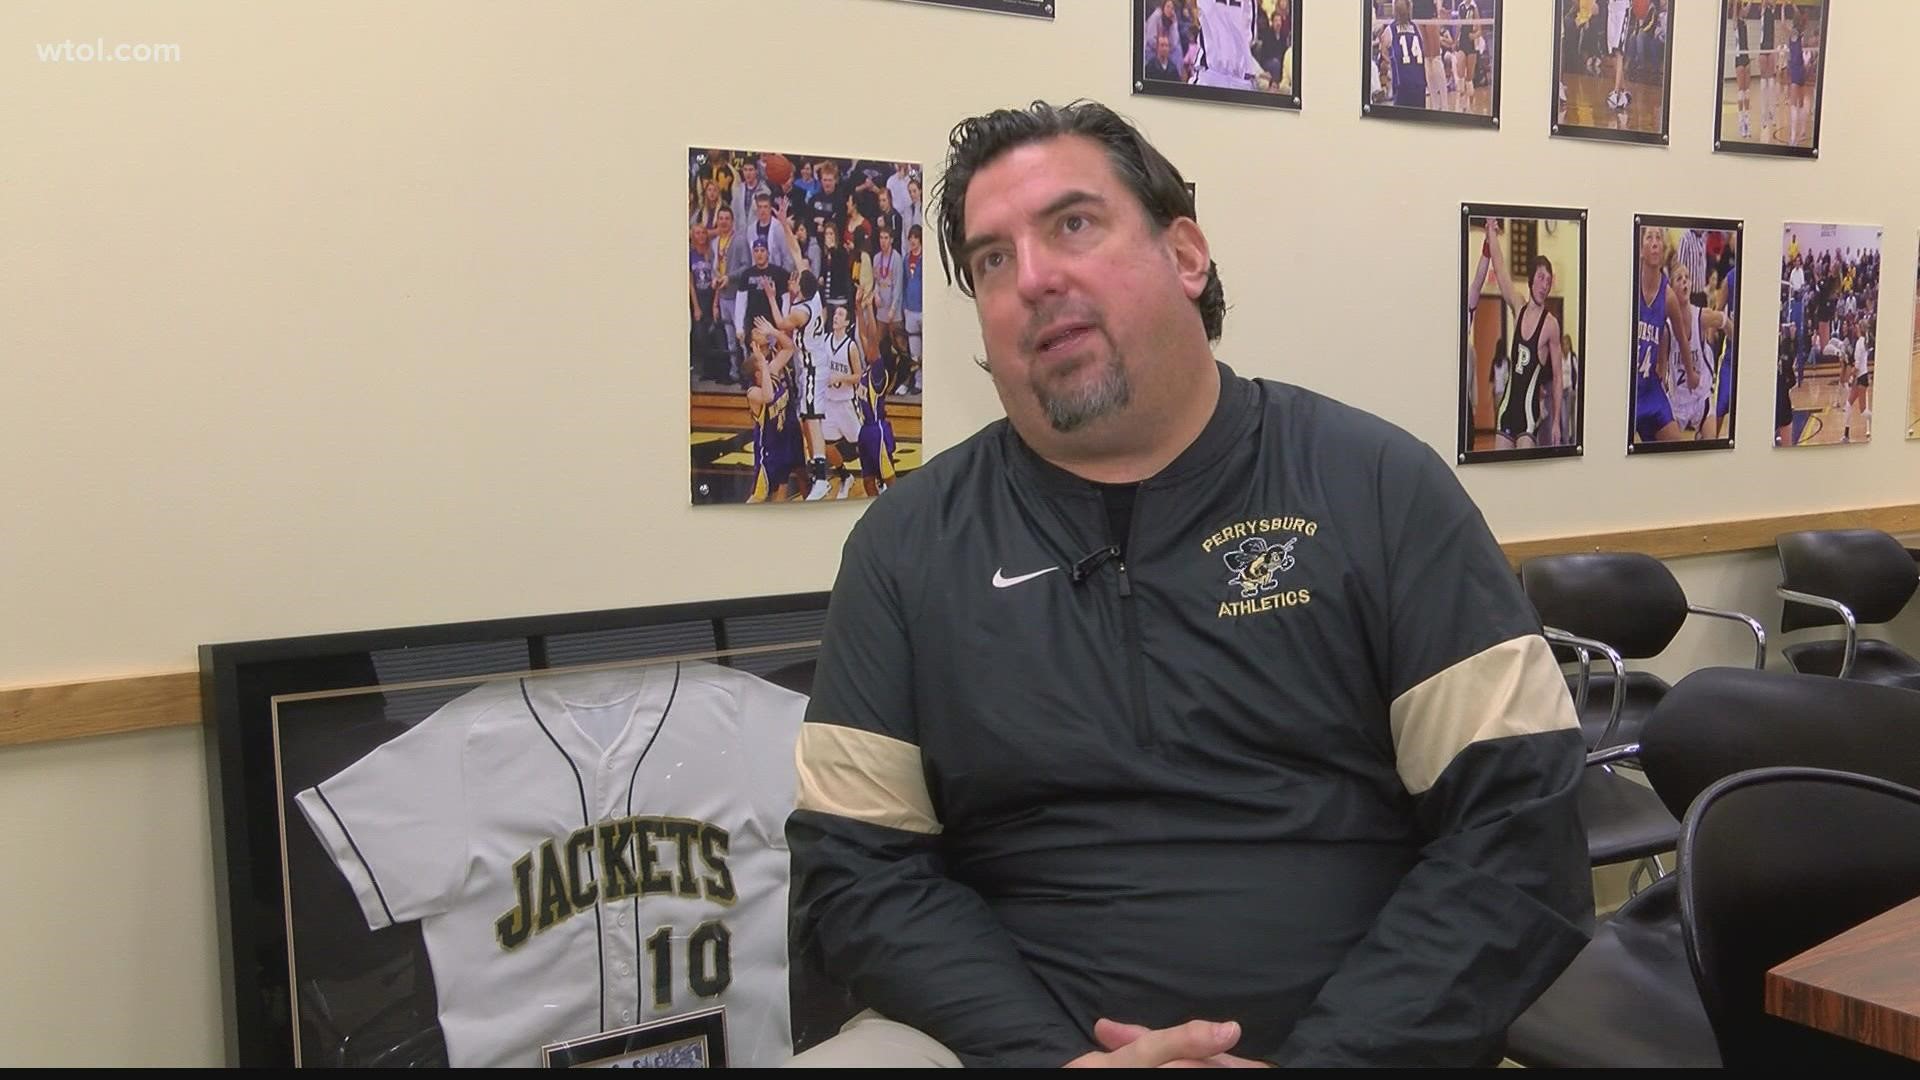 We hear from a local athletic director about the challenges that those involved in school athletics have had to face.